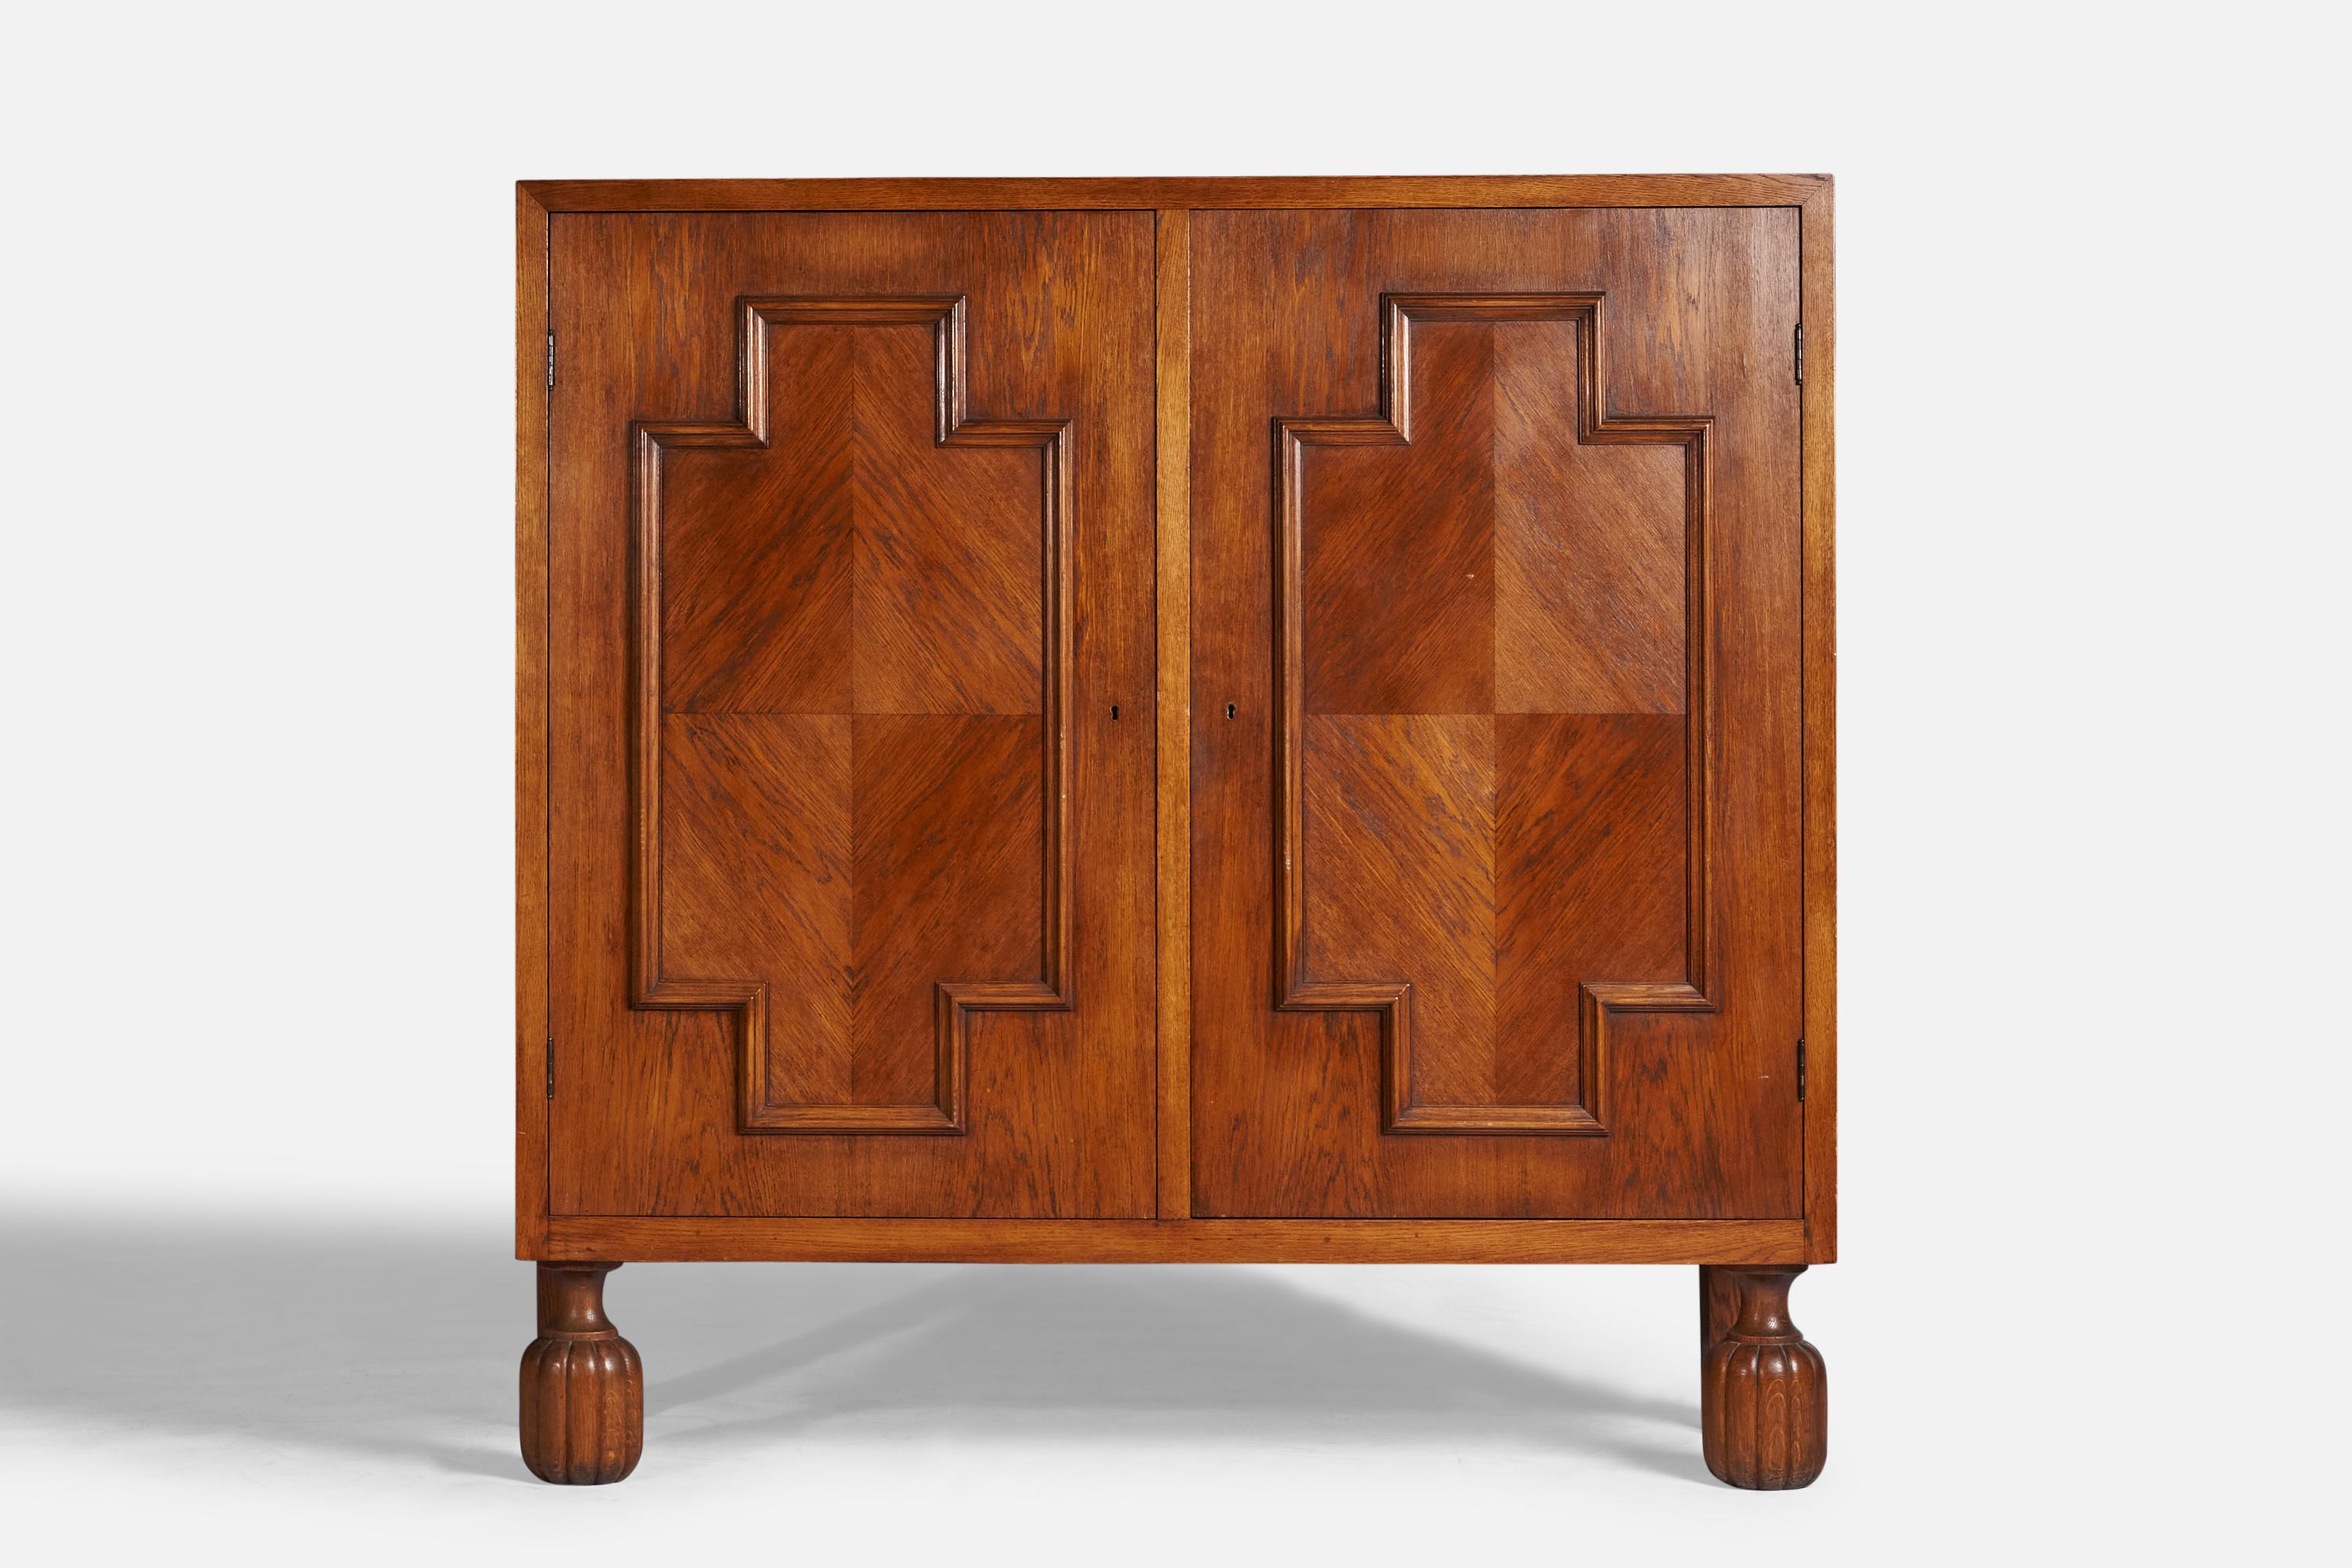 A large stained oak cabinet designed and produced in Sweden, 1930s.